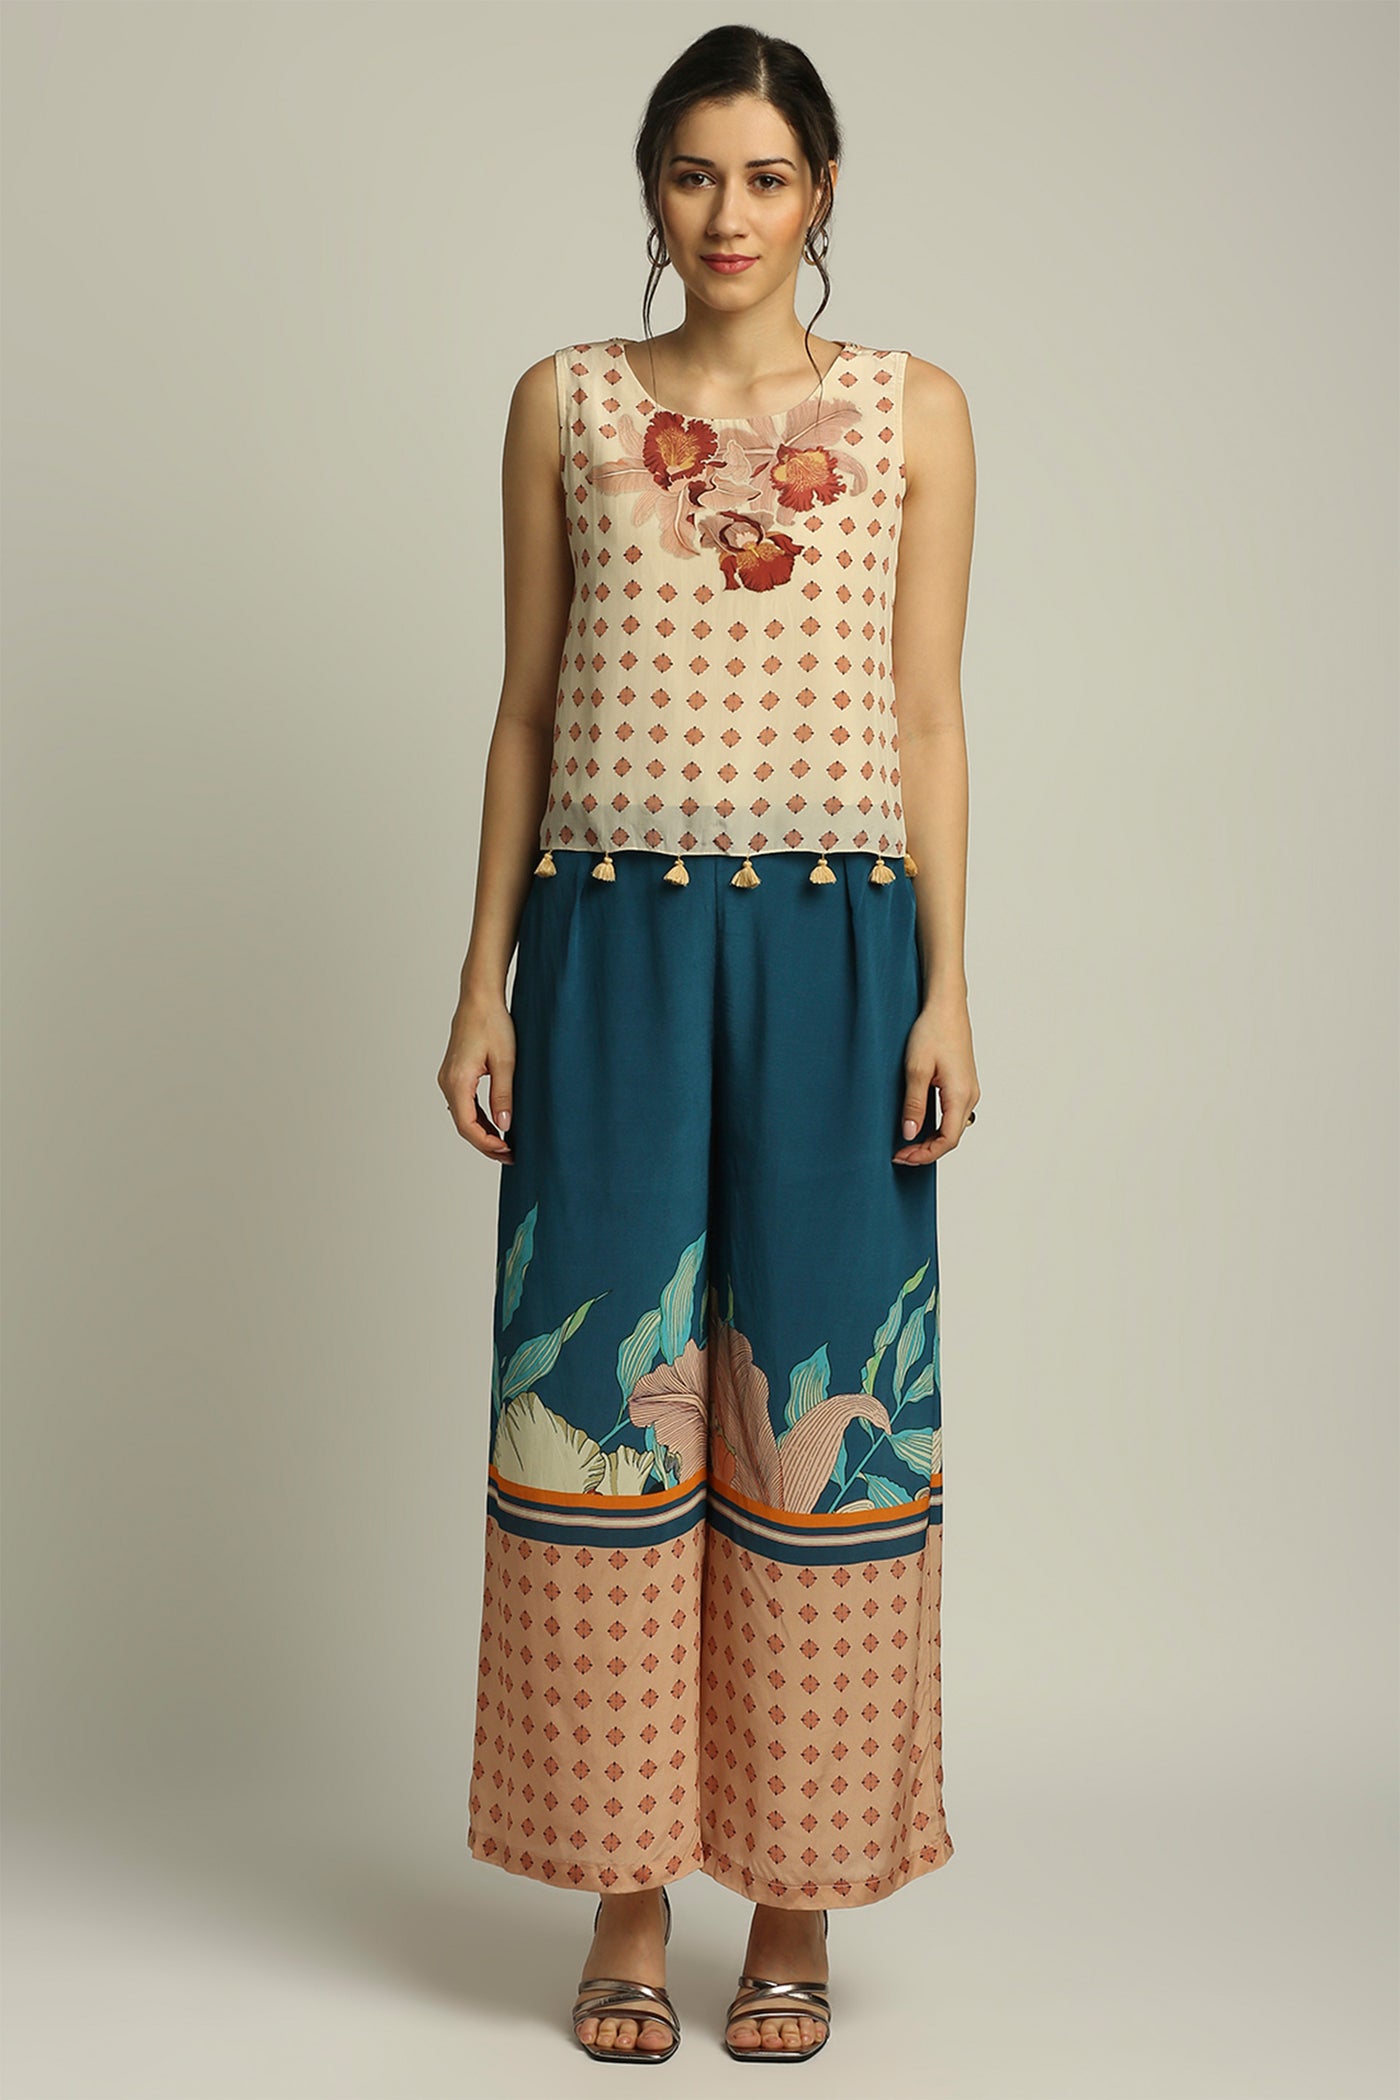 sougat paul Orchid bloom printed pant set with cape peach and teal blue fusion indian designer wear online shopping melange singapore